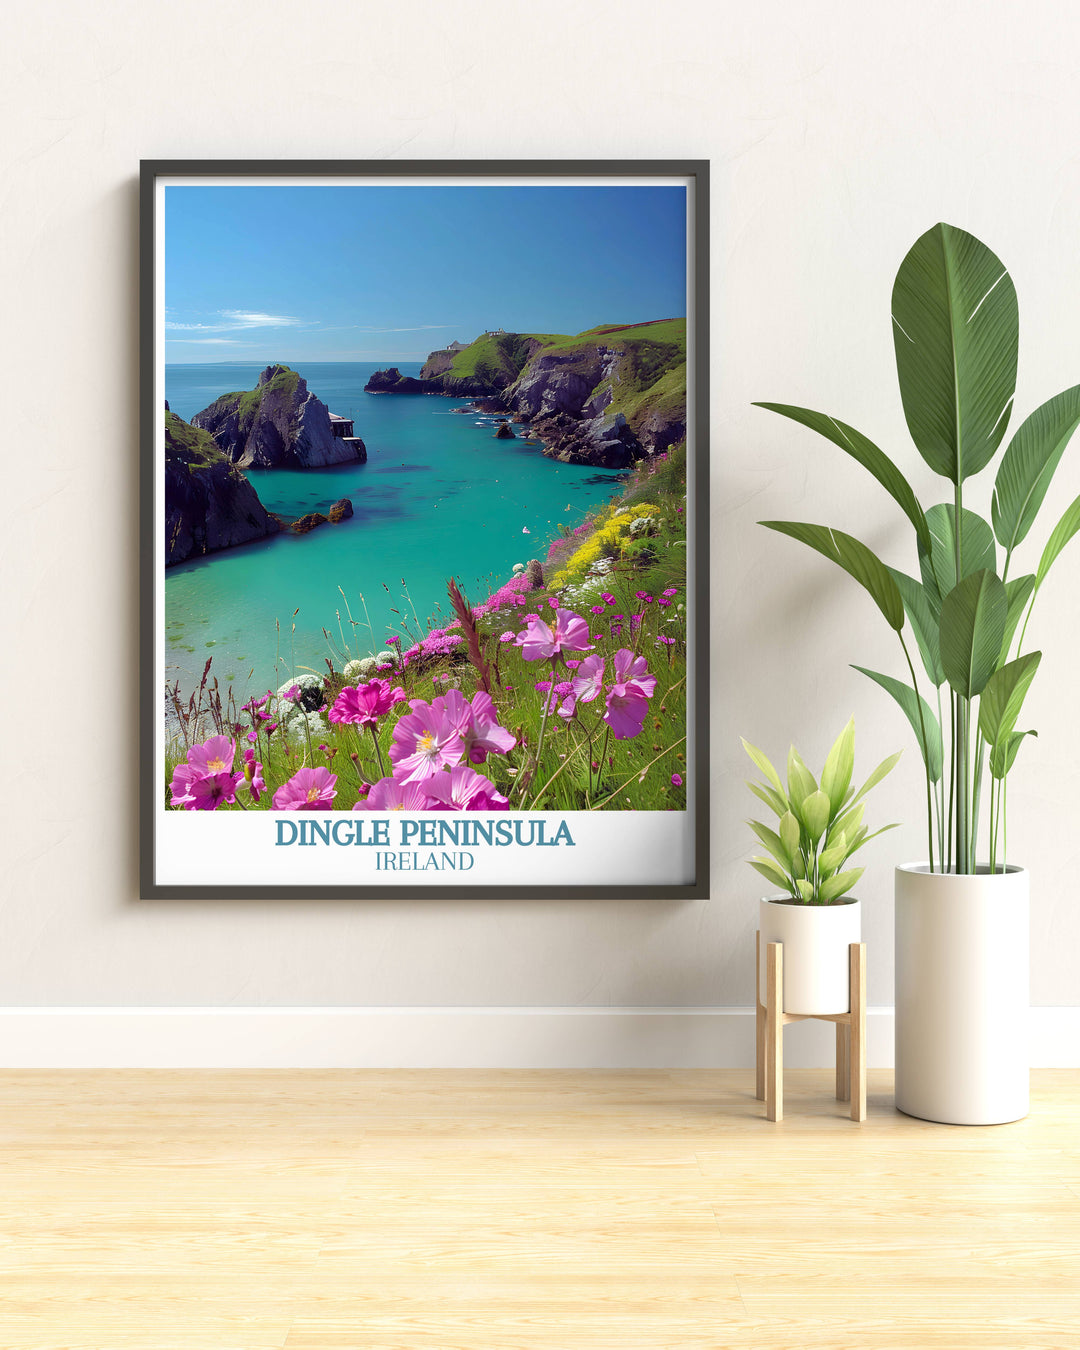 Artistic rendition of Dunquin Pier at sunset, the sky painted in hues of orange and pink above the serene ocean.